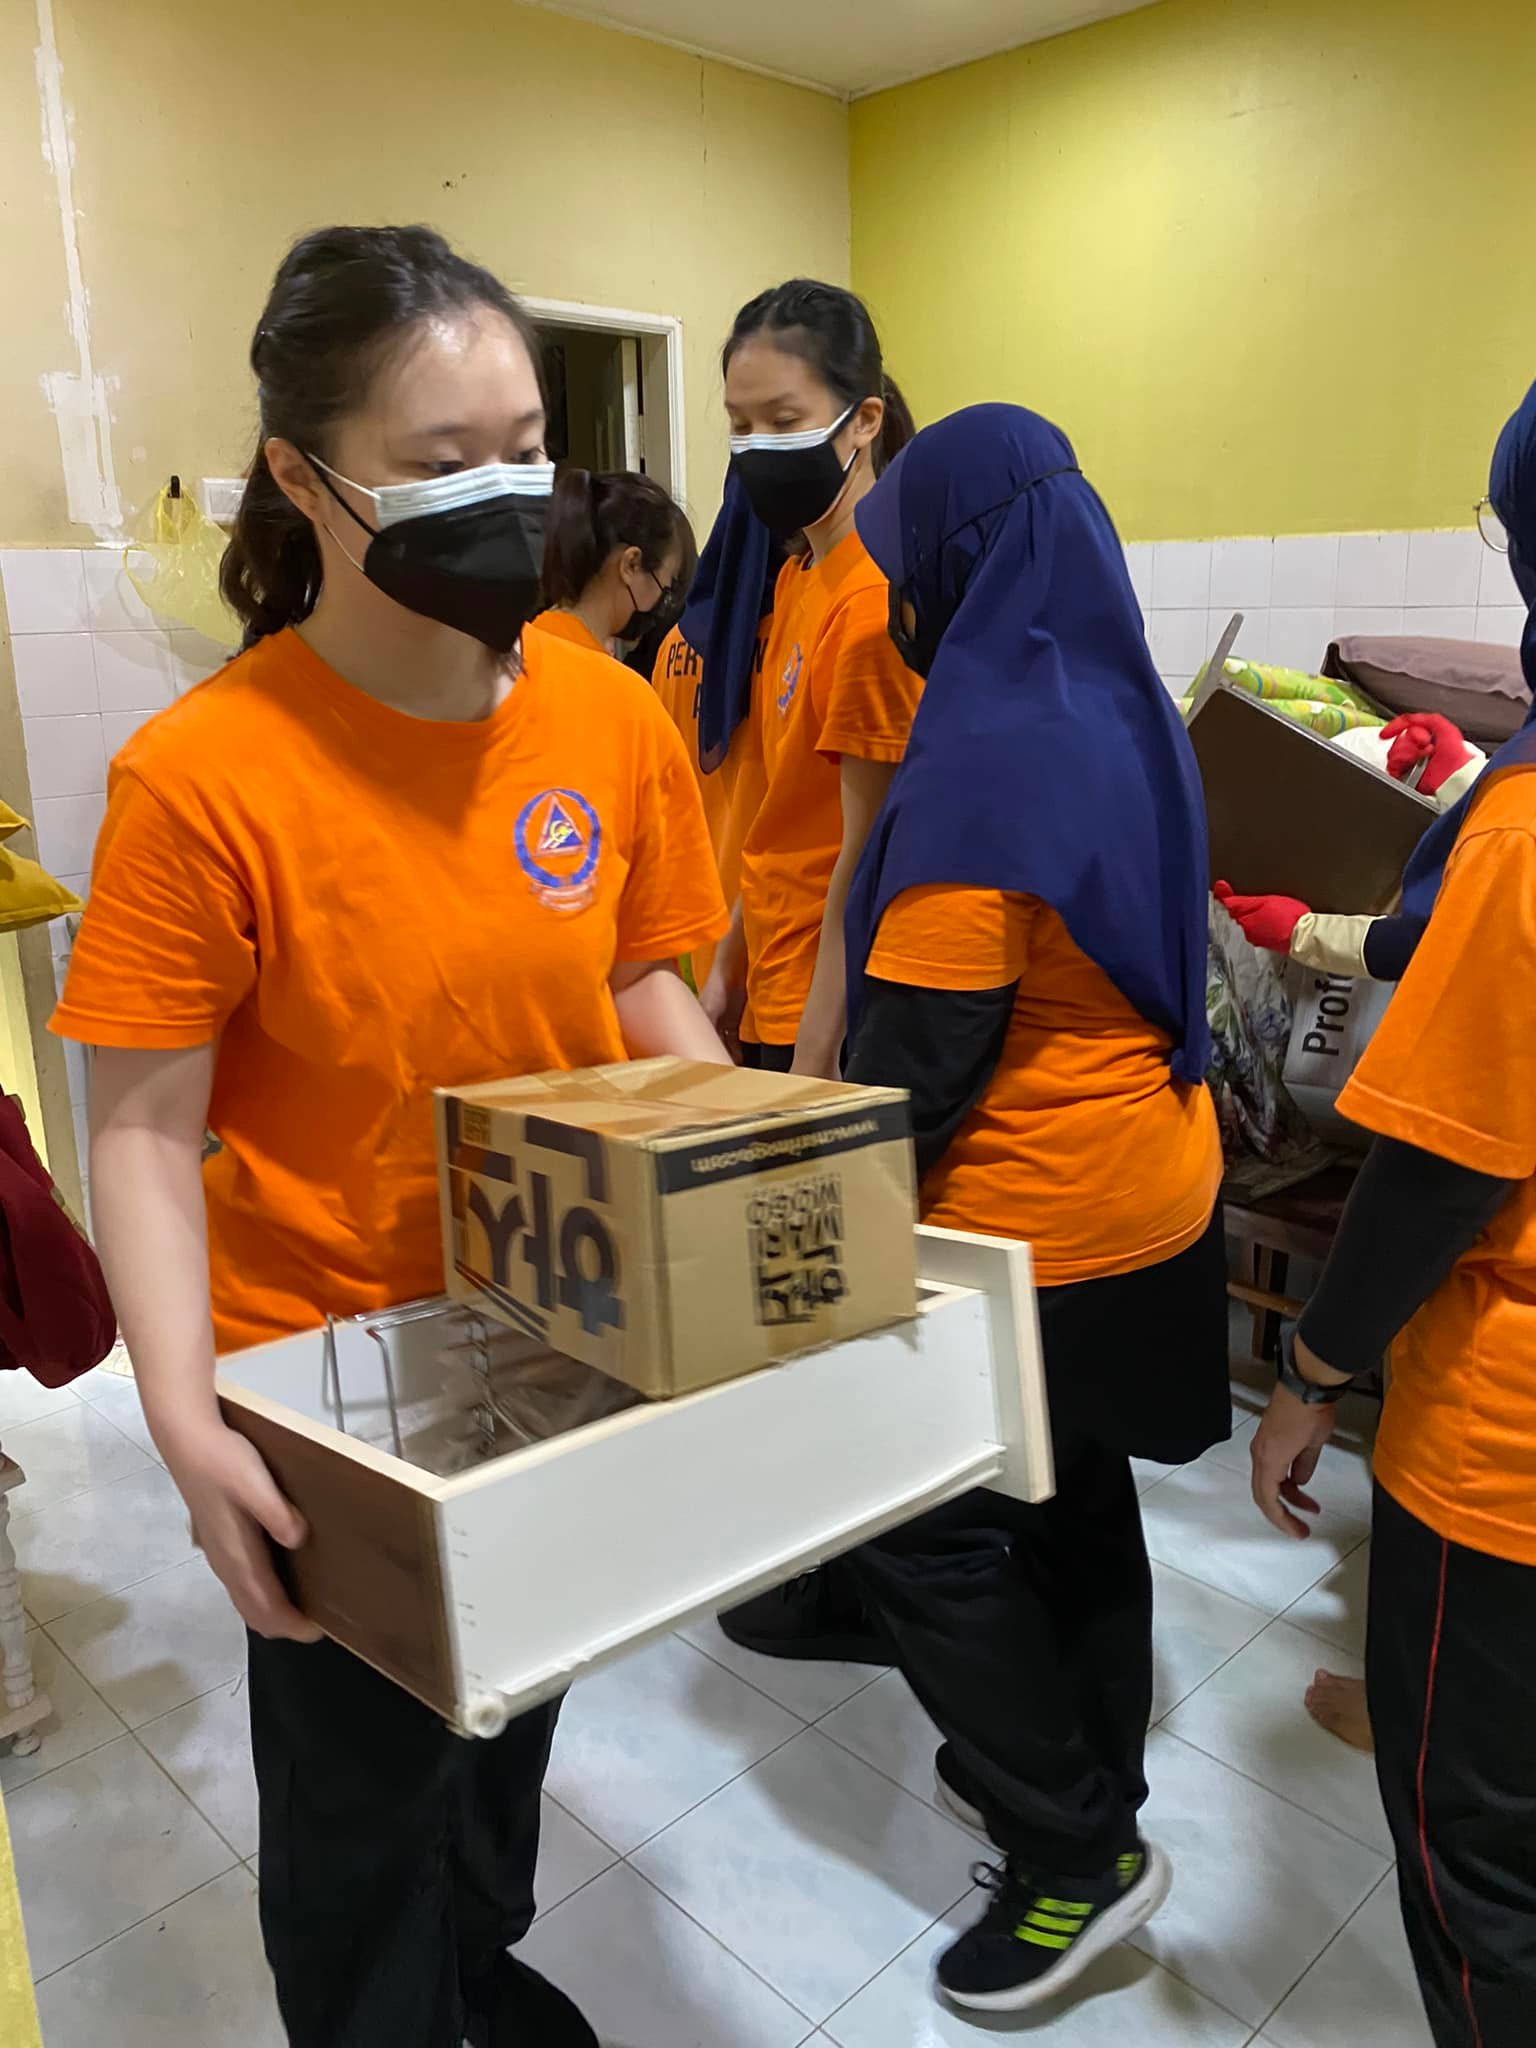 UMP volunteers continue to provide assistance for flood victims